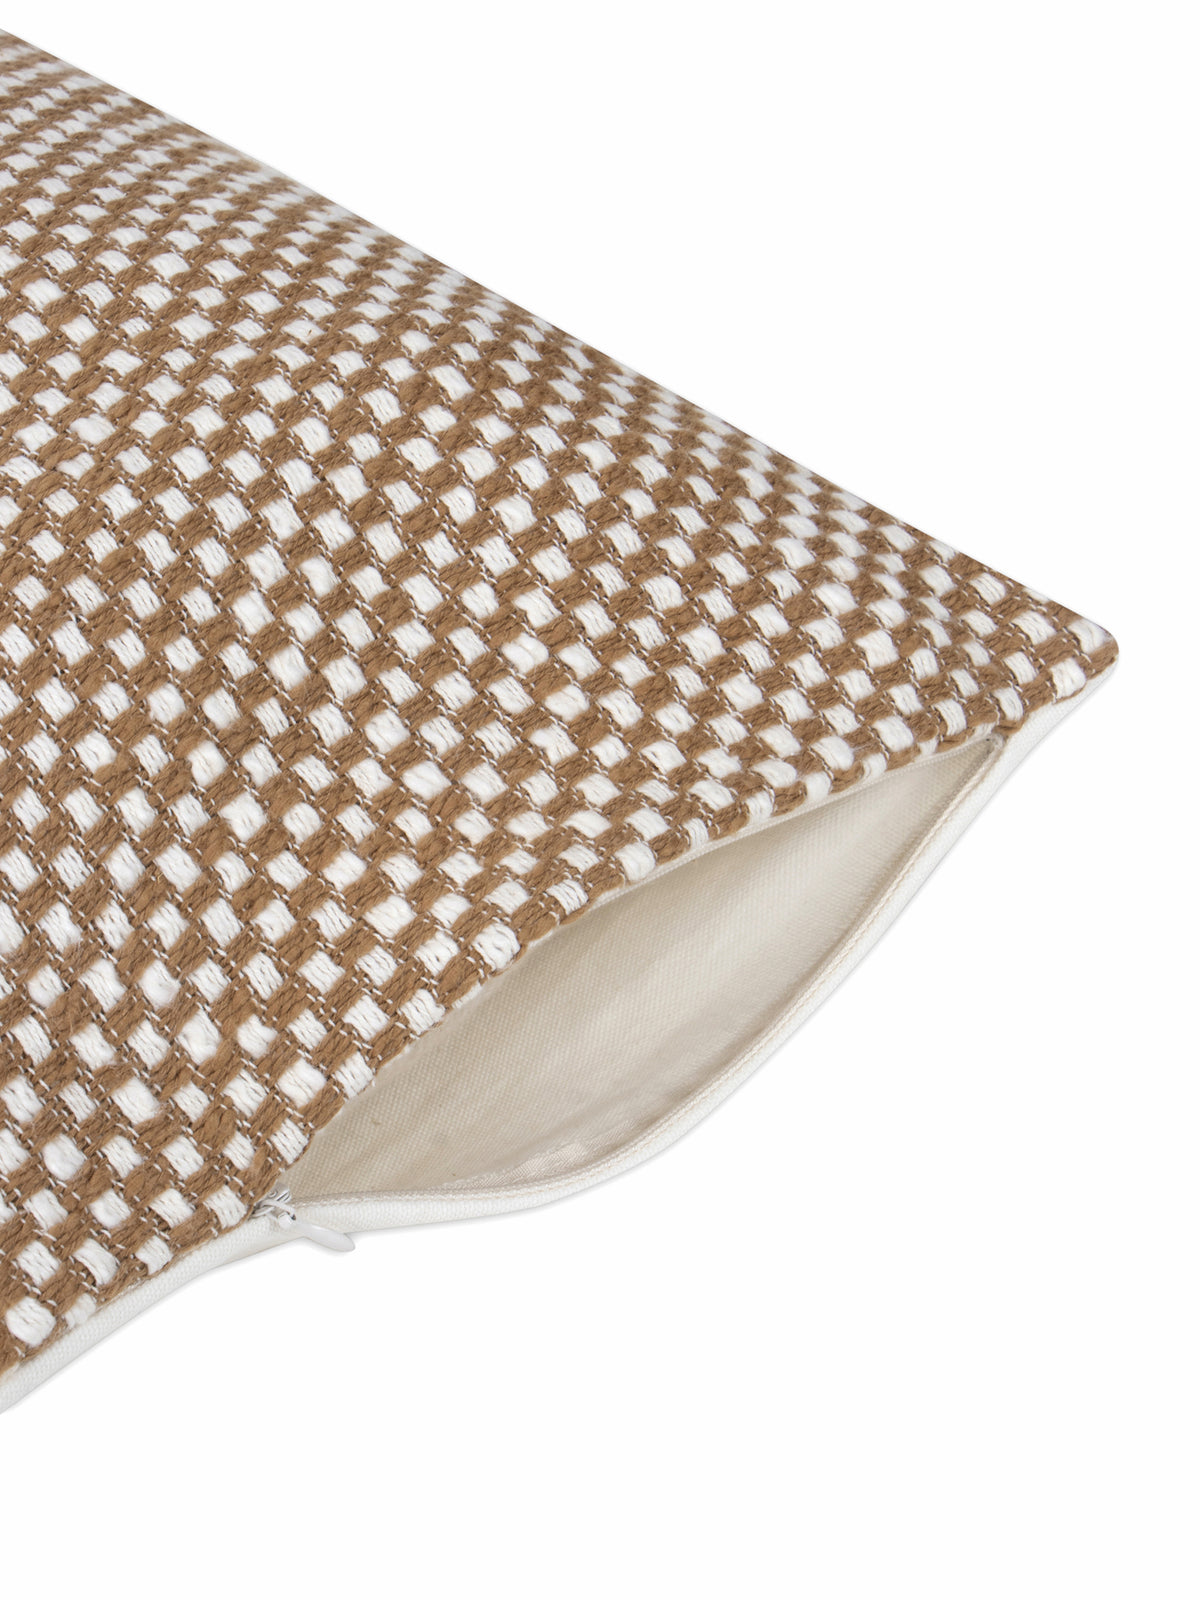 Brown cotton two tone basket weave pattern cushion cover